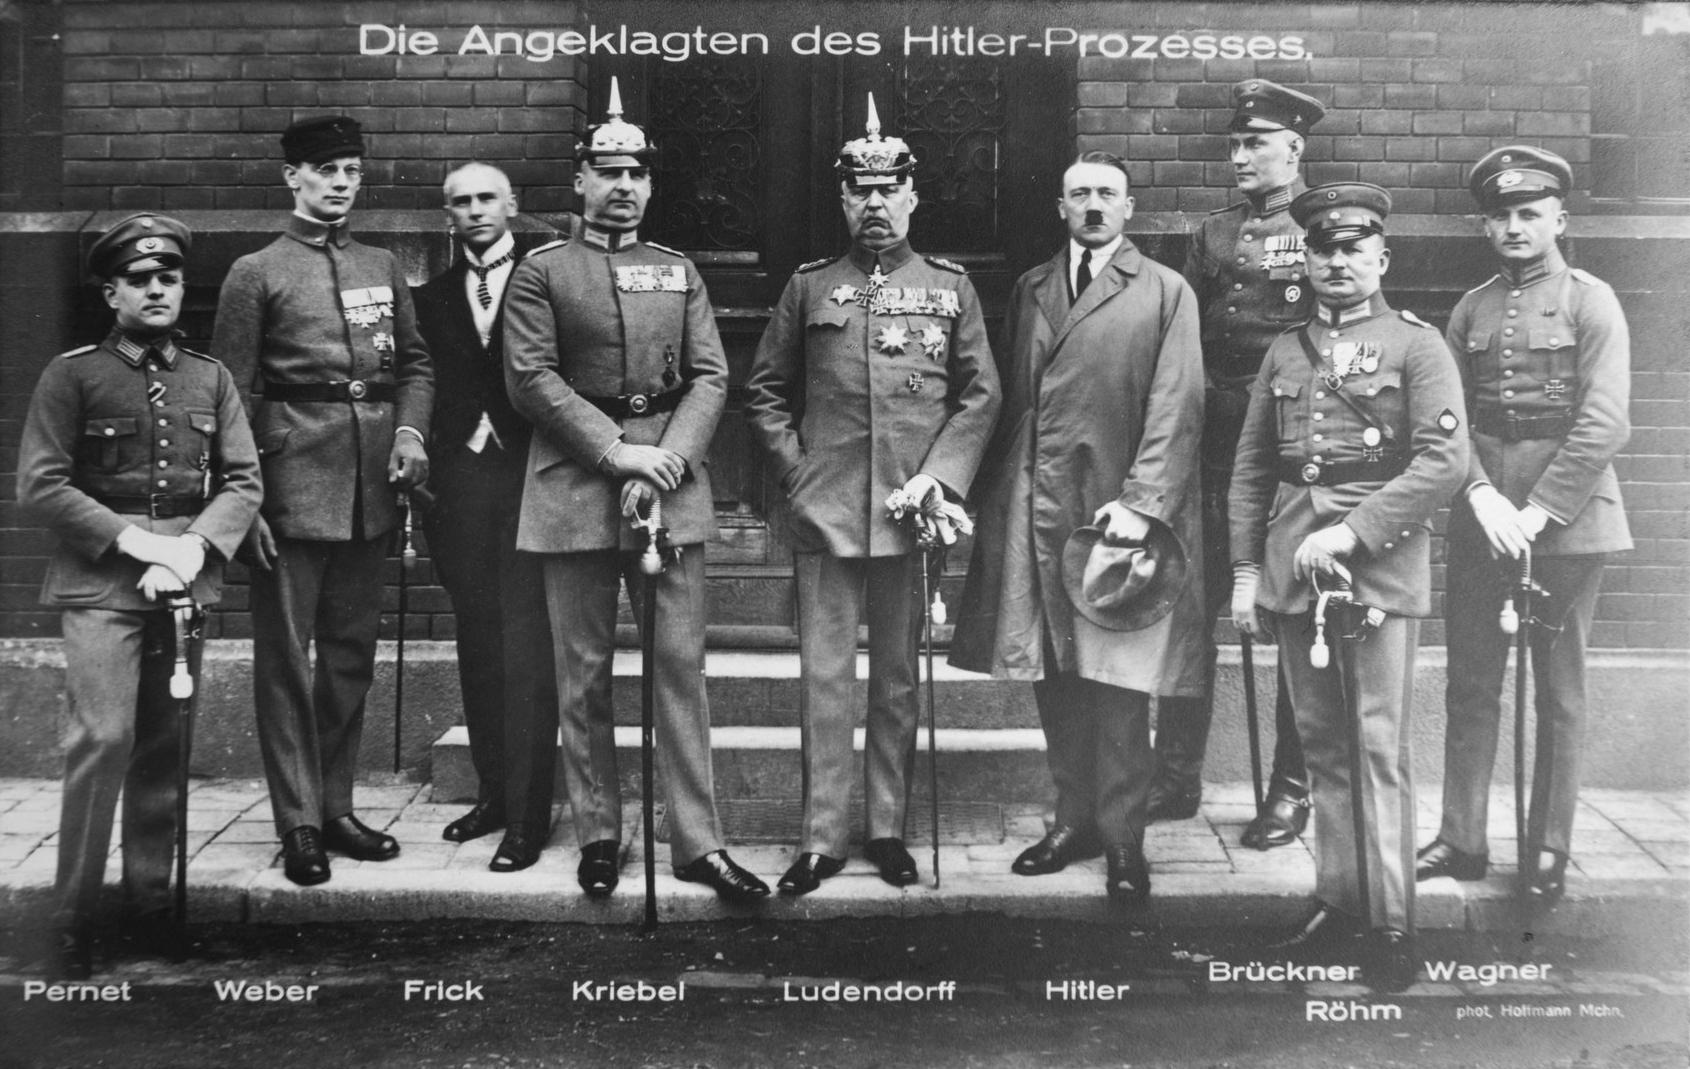 Hitler, Ludendorff, and other defendants pose during their trial after the failed putsch in Munich